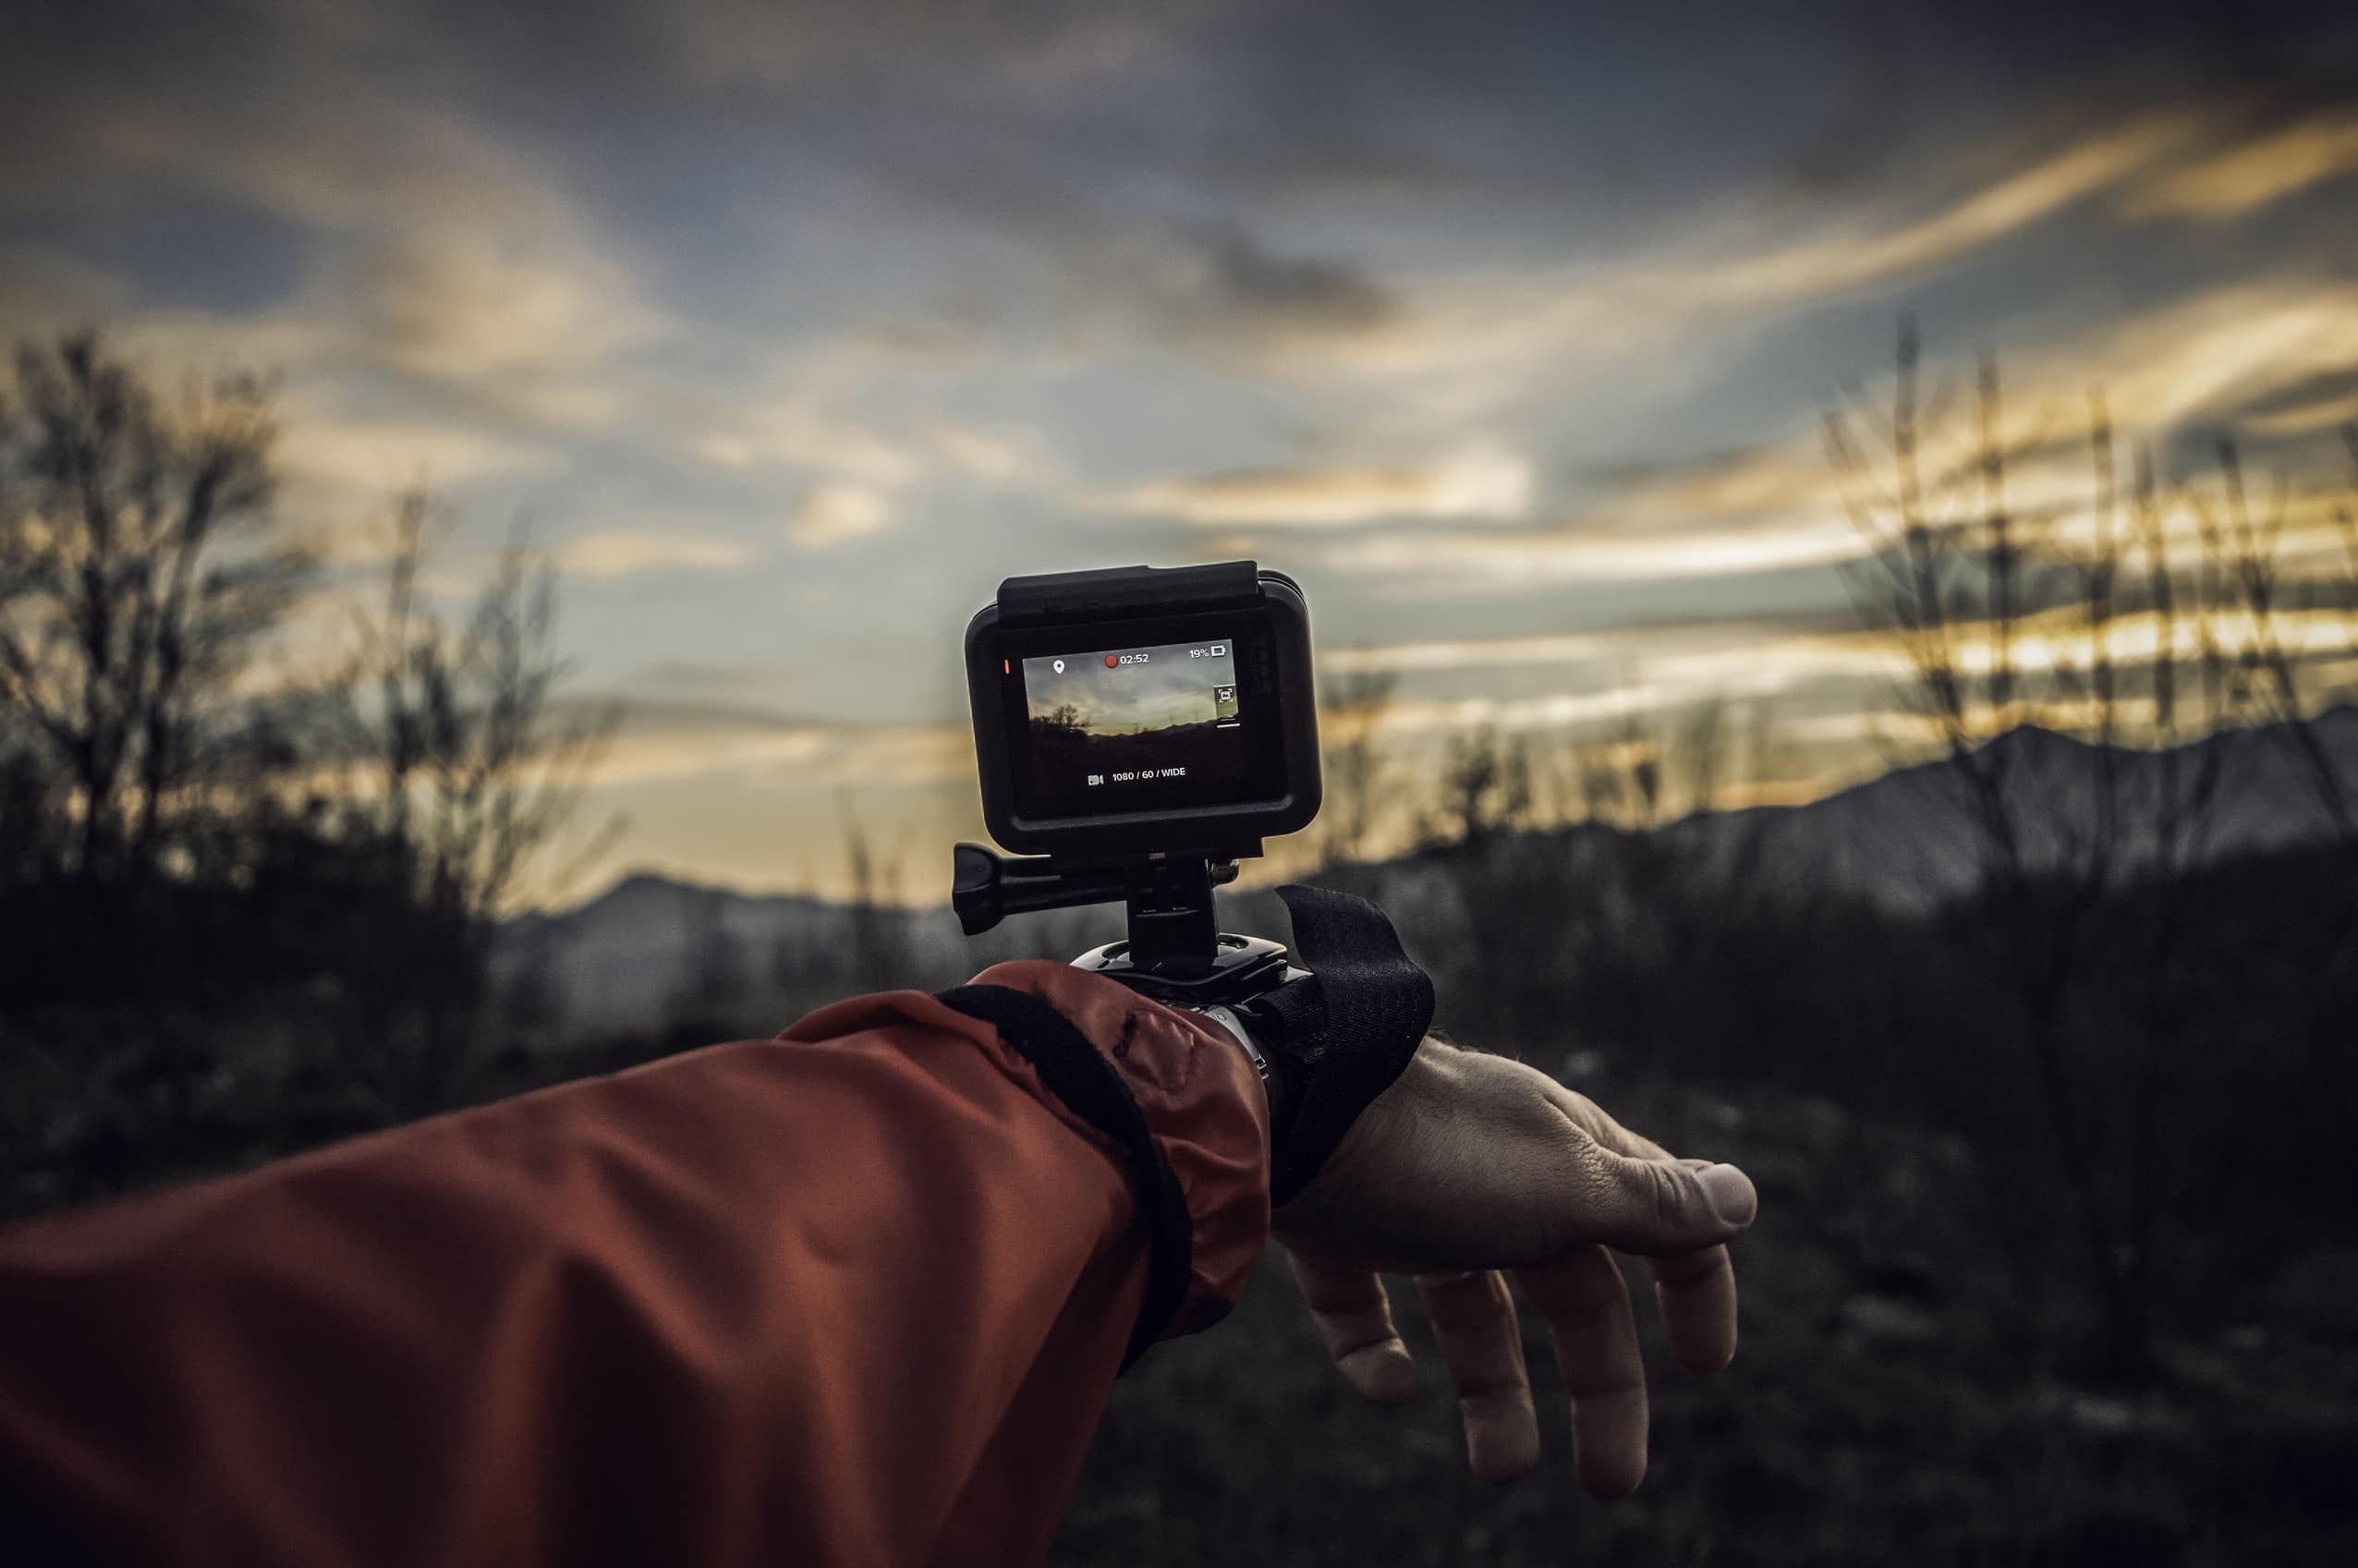 10 Best Budget Cameras For Filmmaking - An image of an action camera in use